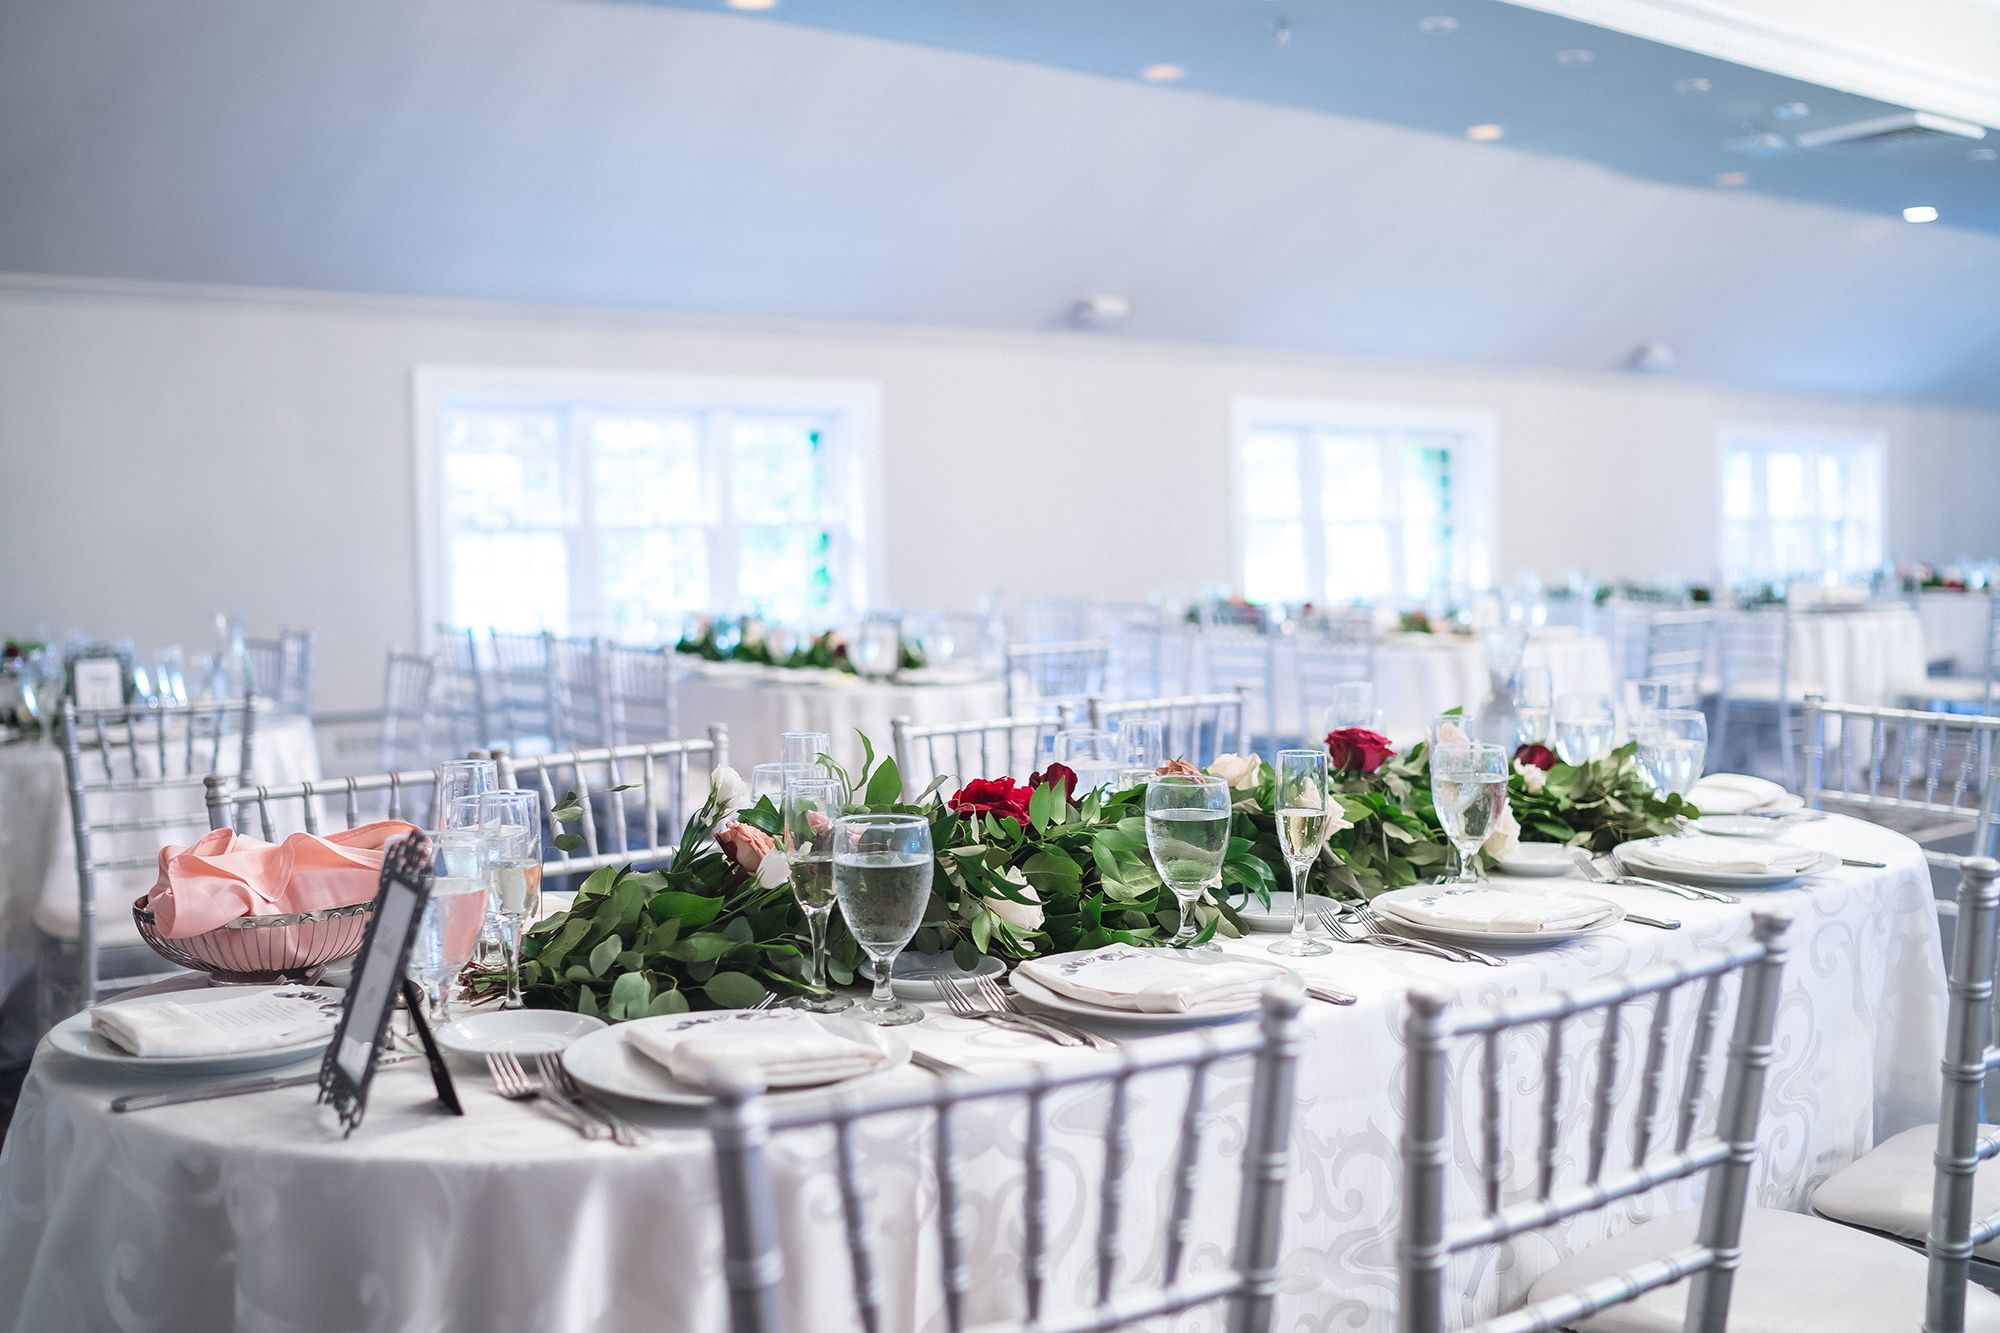 How Many Centerpieces Are Needed For An 8-Foot Table?